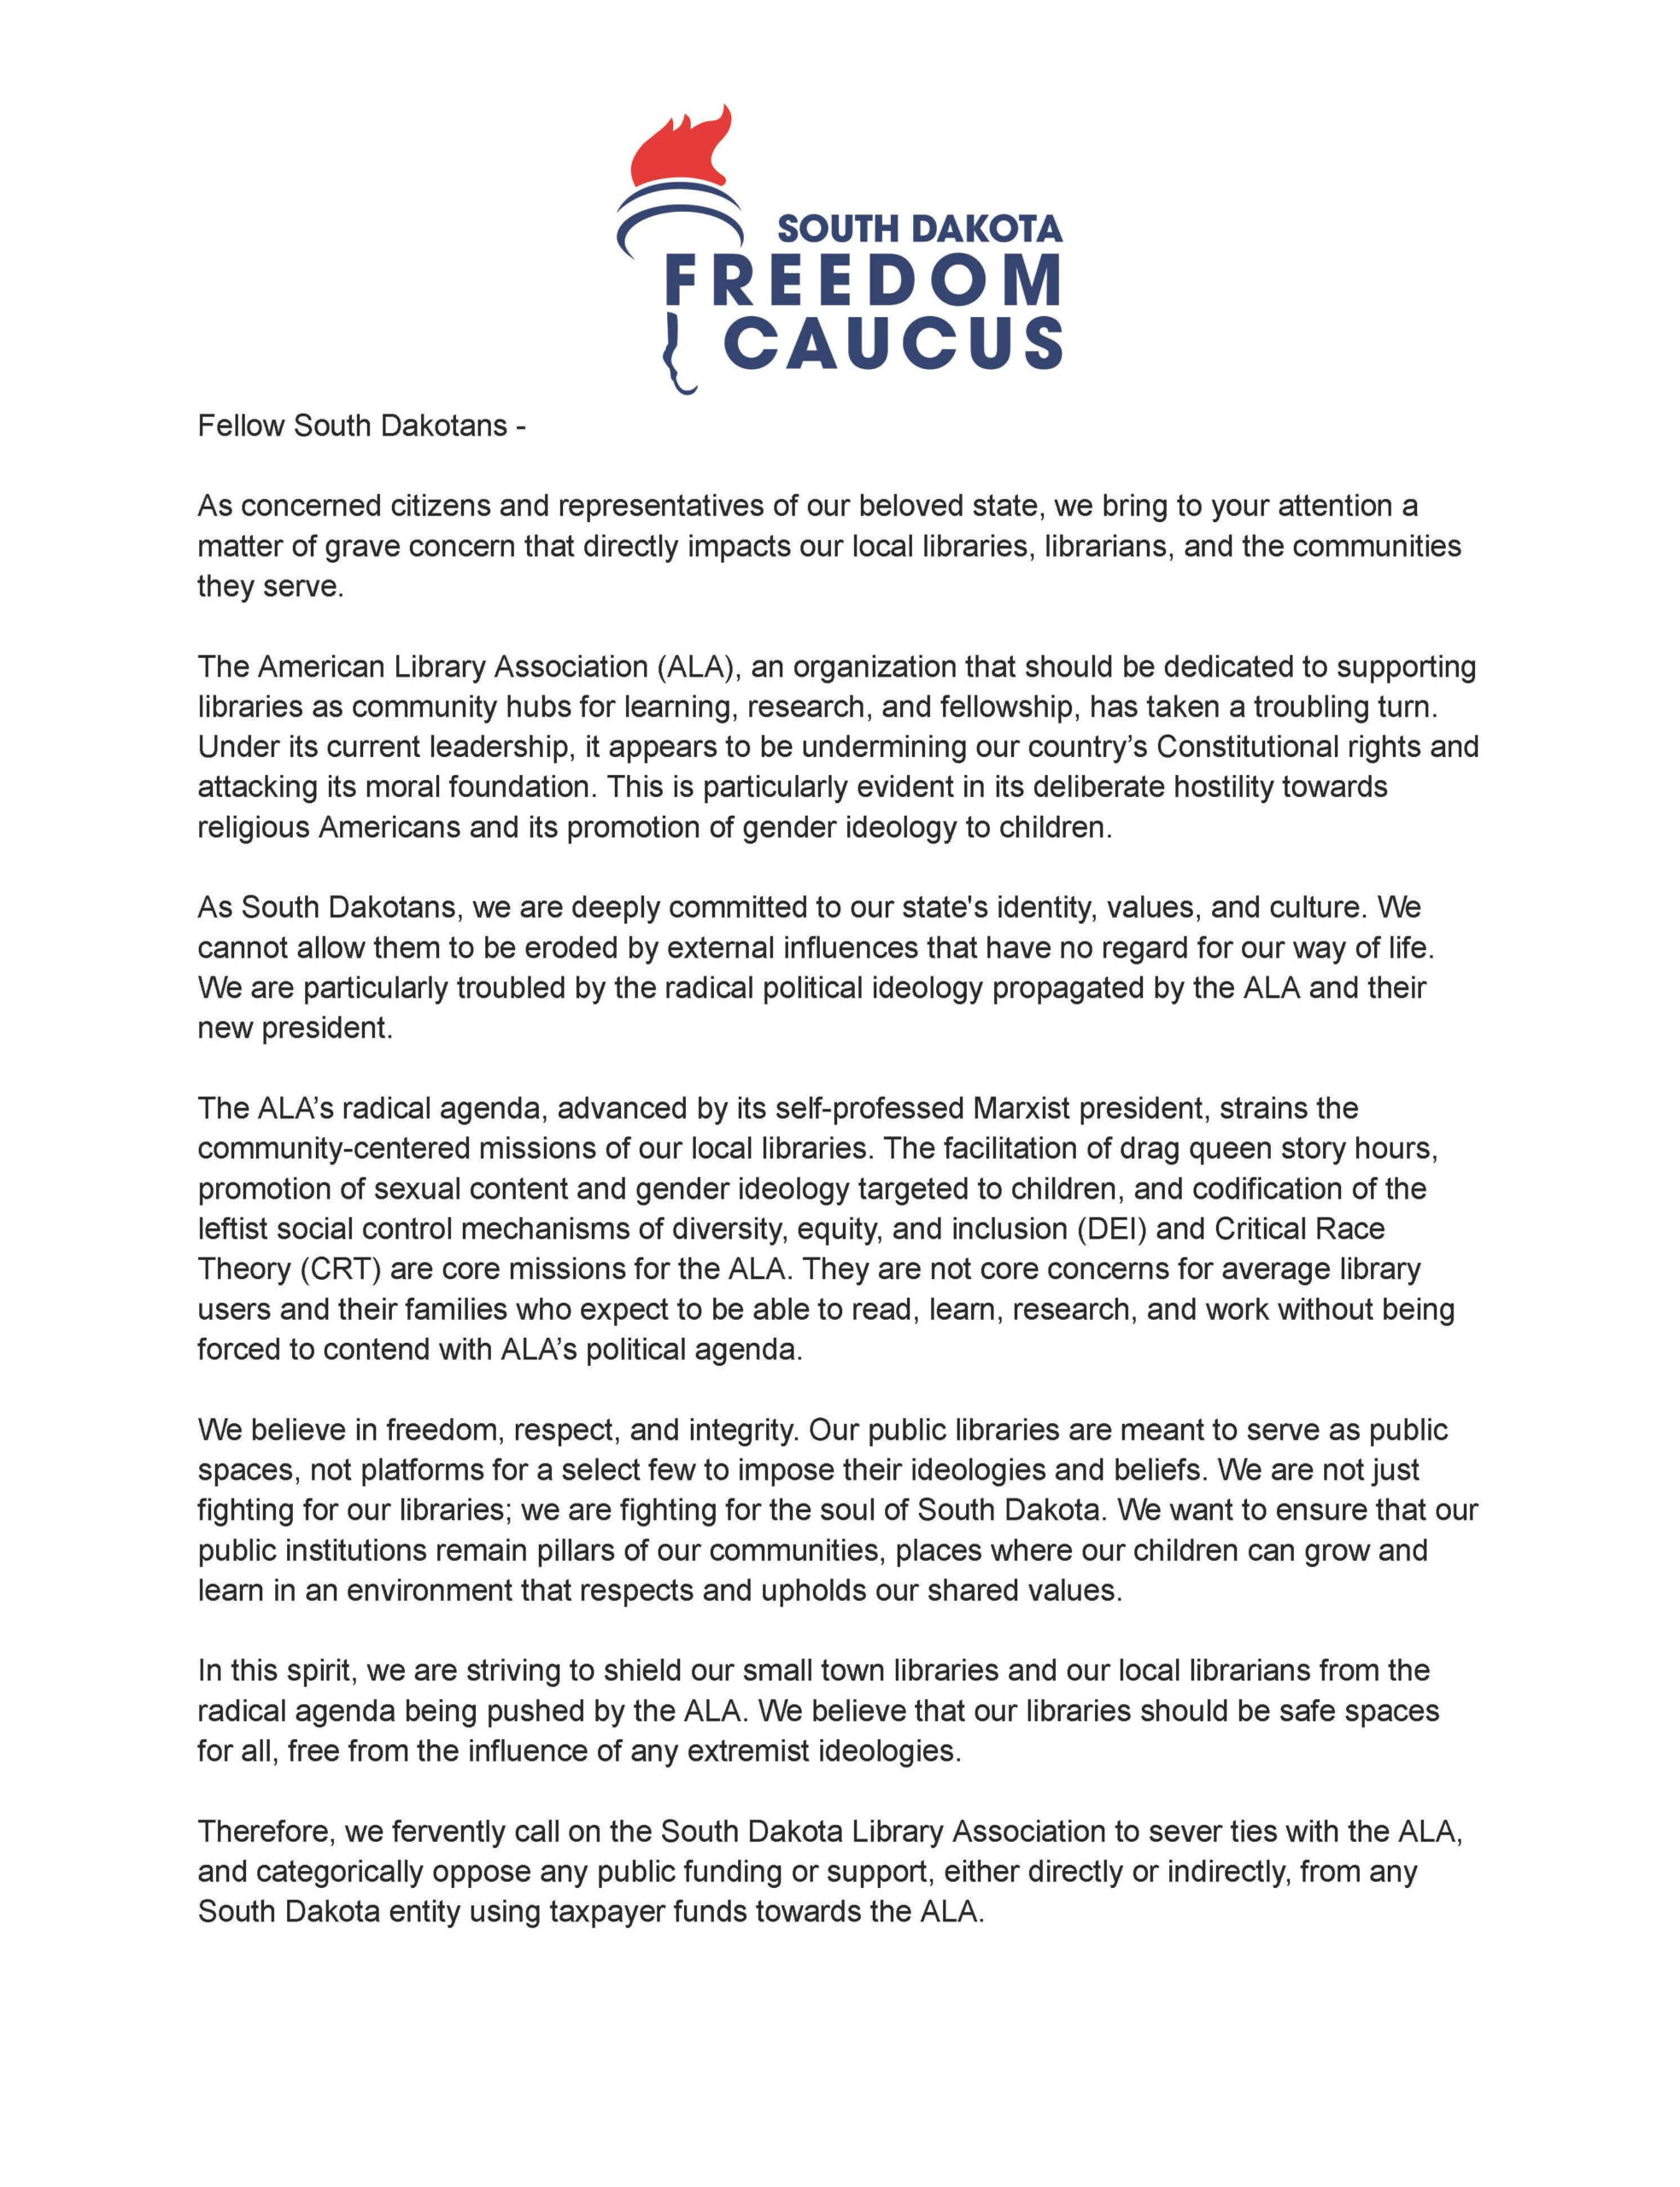 SDFC Coalition Letter Page 1